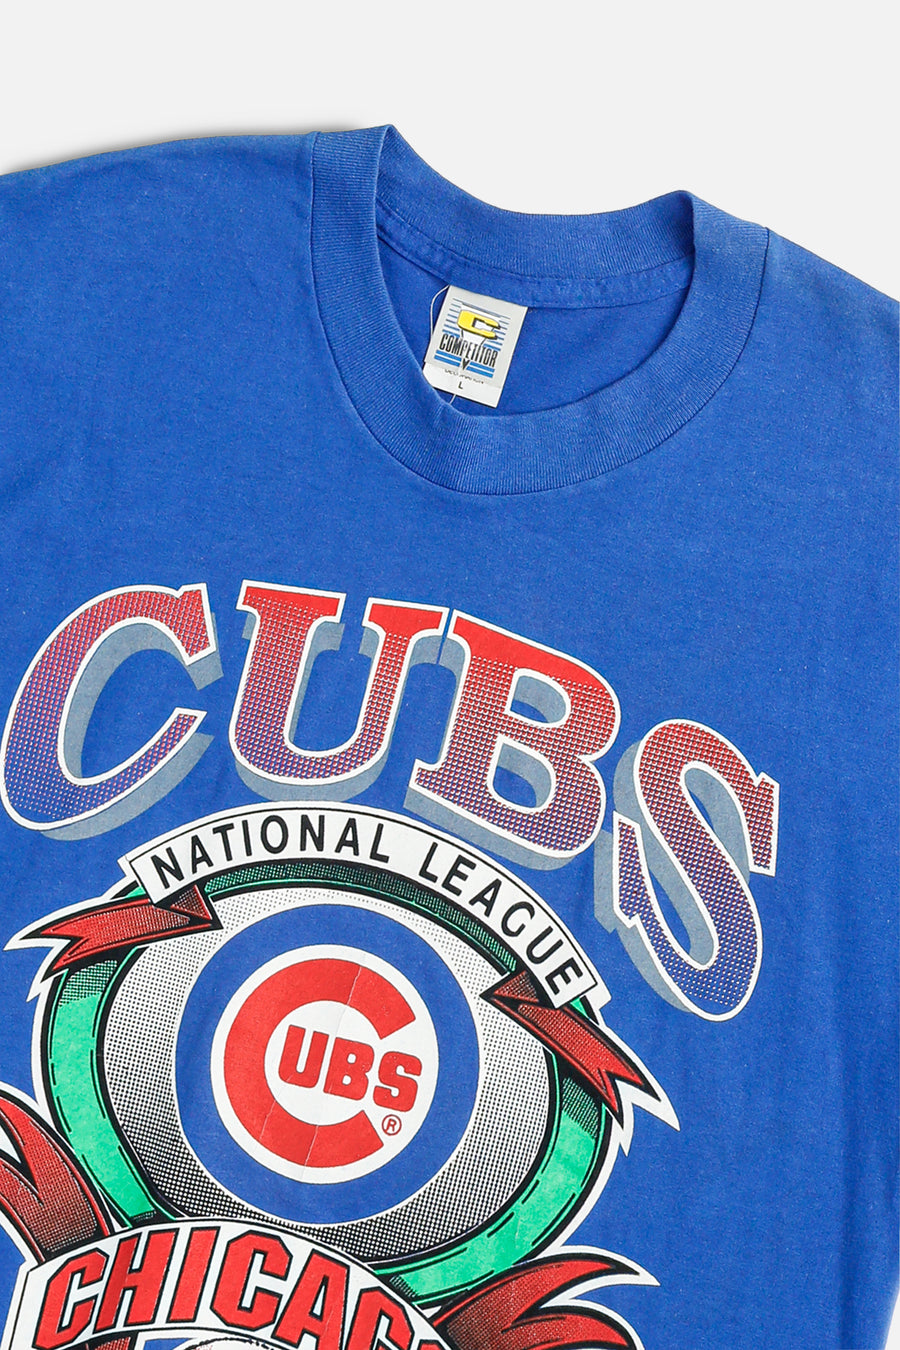 Vintage Chicago Cubs MLB Tee - Women's S